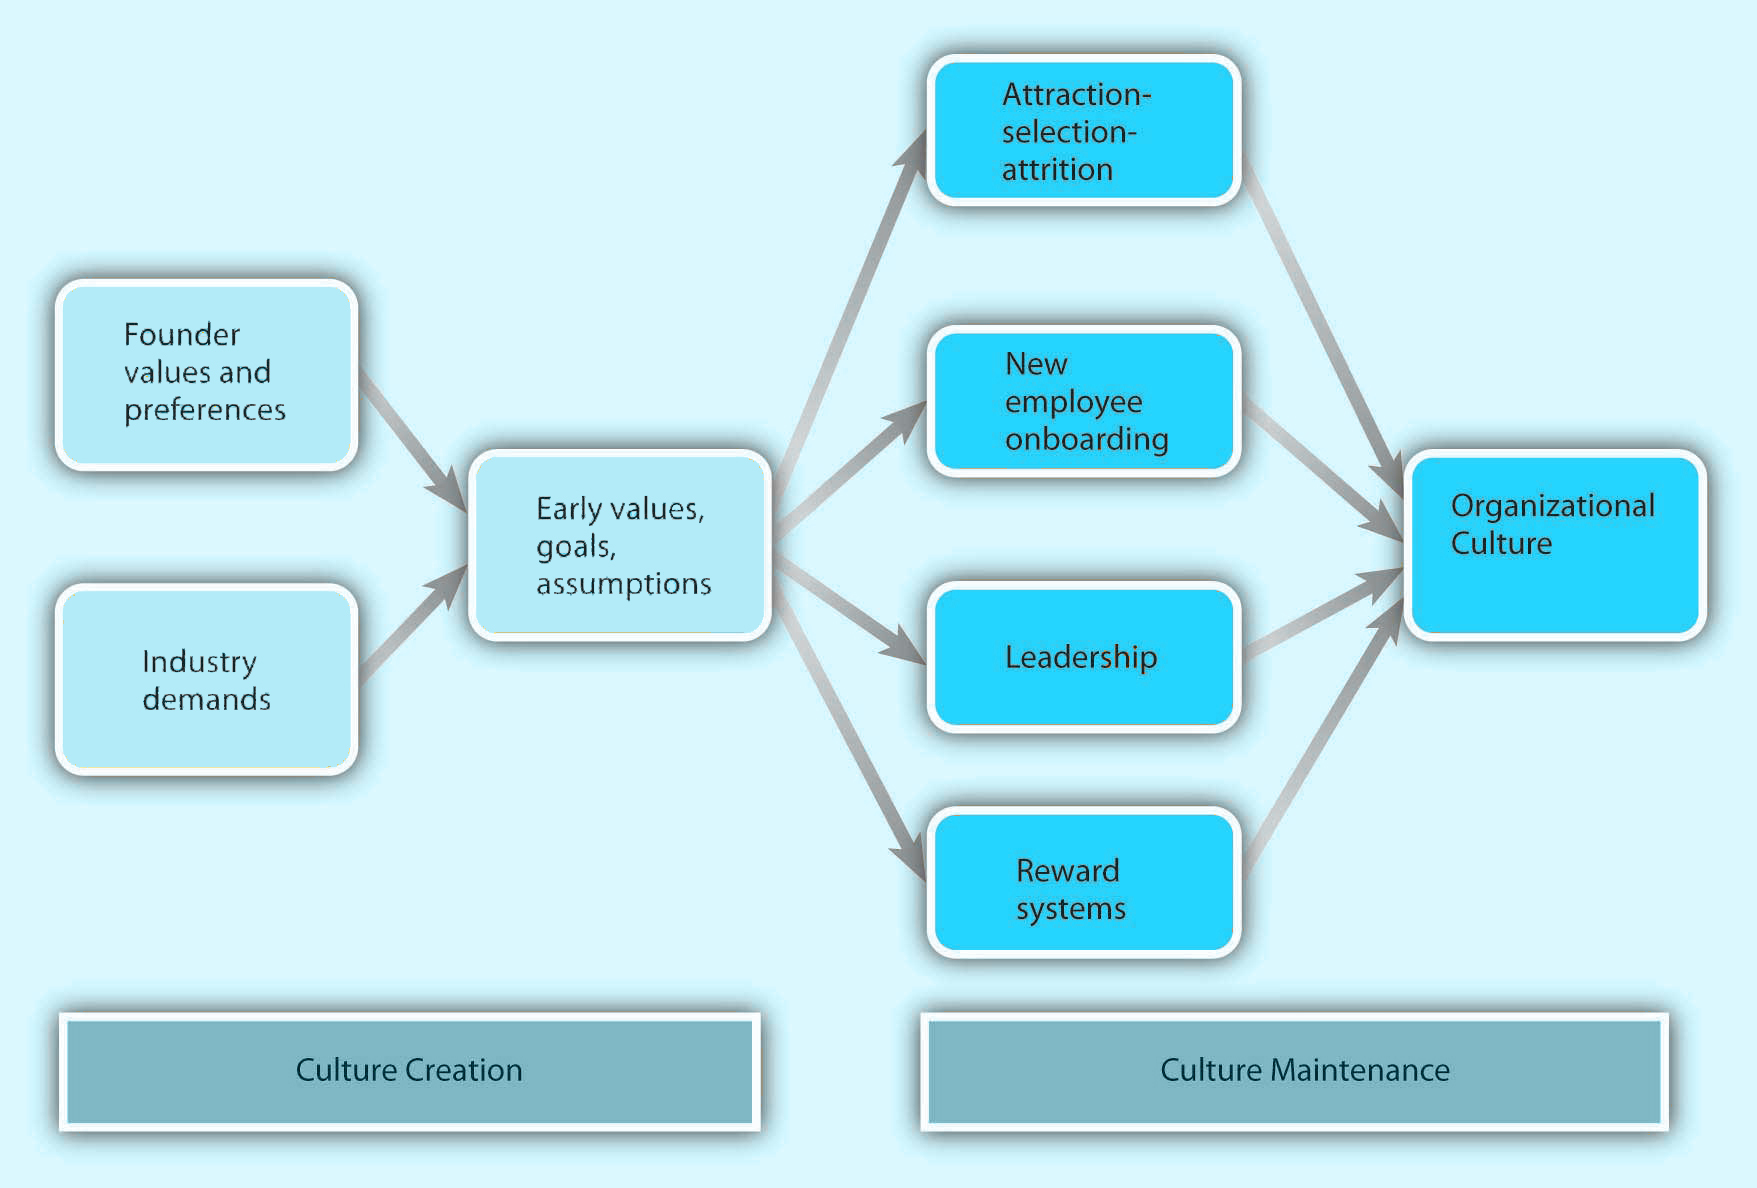 Illustration of Culture Creation and Maintenance